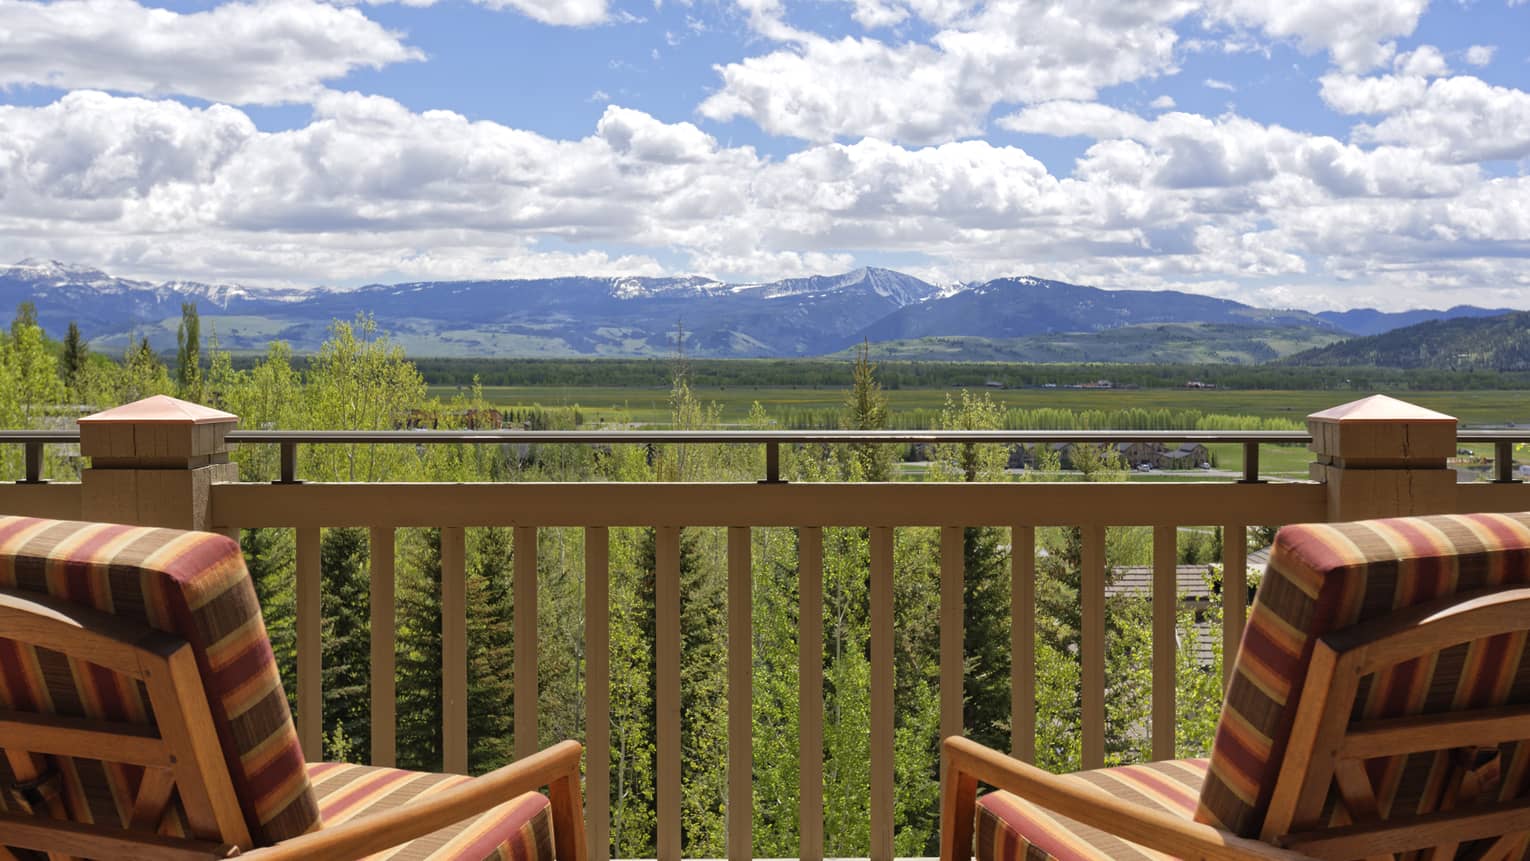 Two chairs on outdoor wooden deck looking out to lush mountain valley